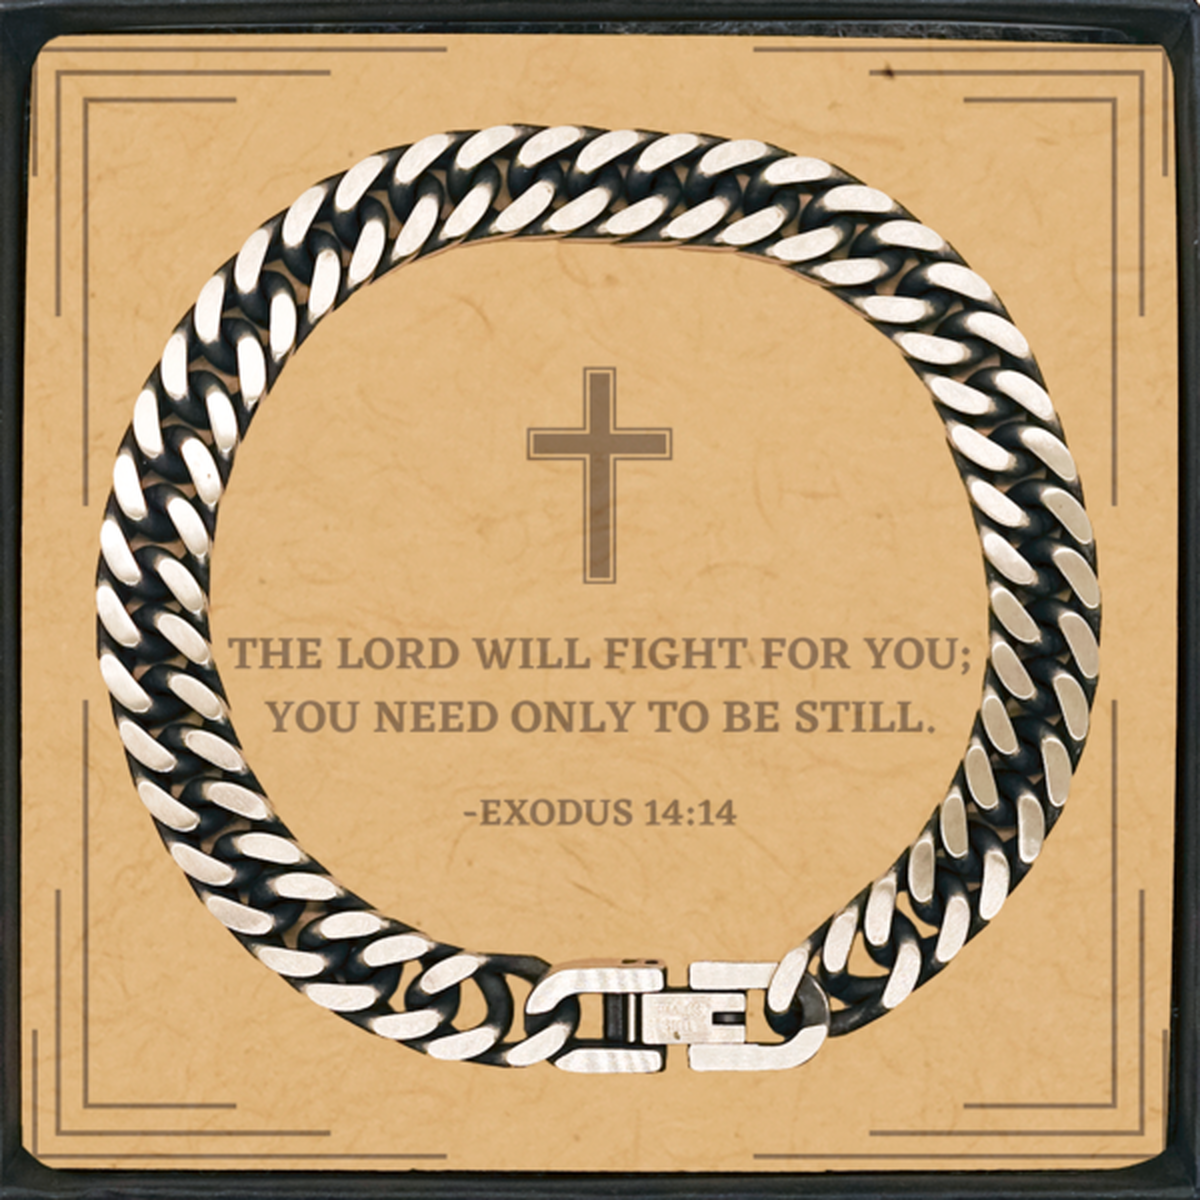 Baptism Gifts For Teenage Boys Girls, Christian Bible Verse Cuban Link Chain Bracelet, The Lord will fight for you, Confirmation Gifts, Bible Verse Card for Son, Godson, Grandson